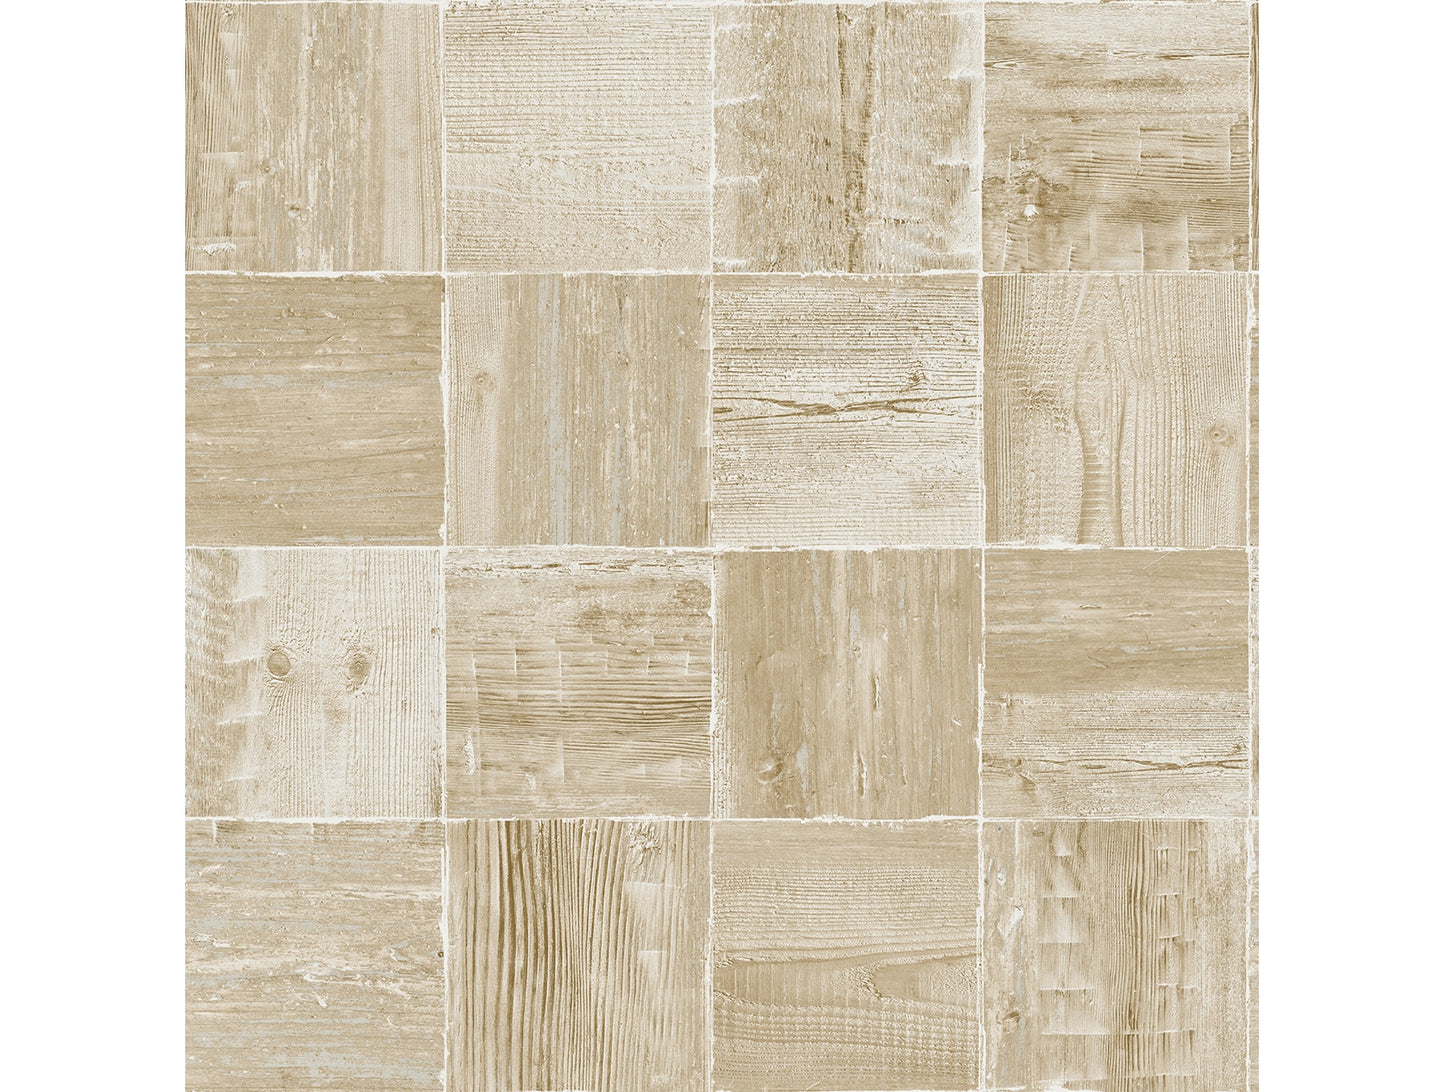 Washed Wooden Tiles